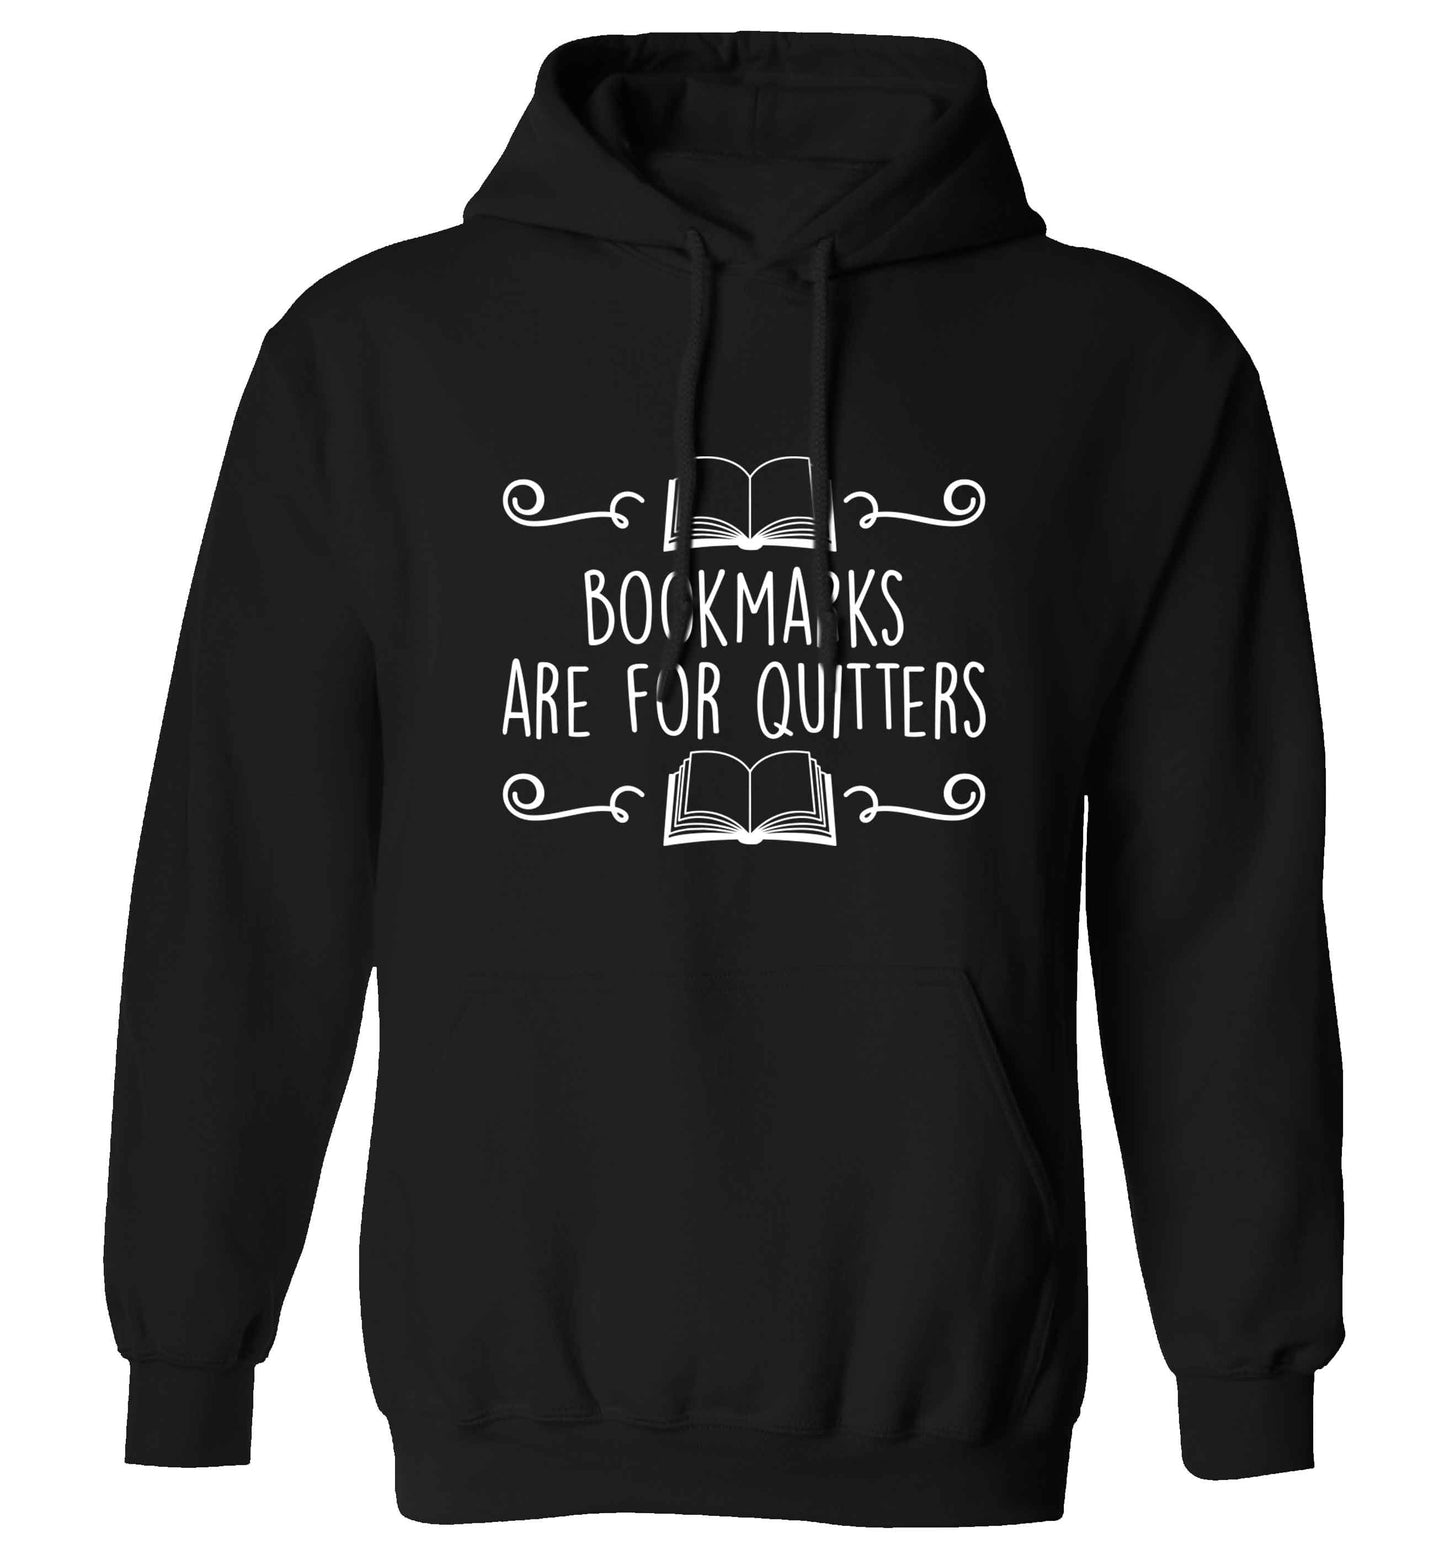 Bookmarks are for quitters adults unisex black hoodie 2XL